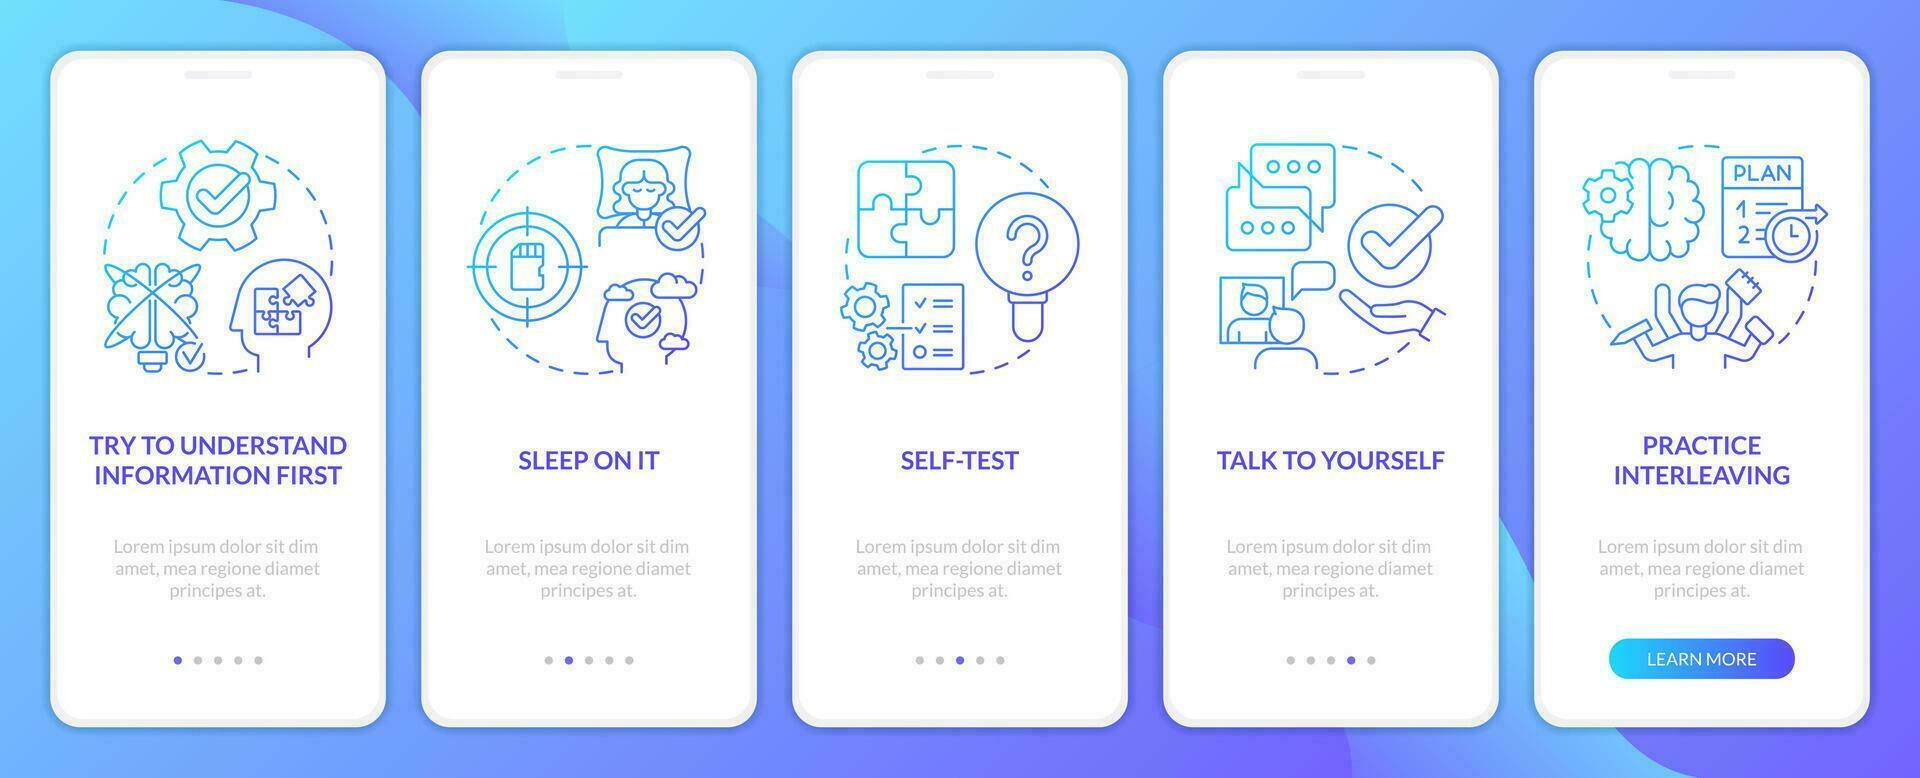 Simple memory tips blue gradient onboarding mobile app screen. Learn things walkthrough 5 steps graphic instructions with linear concepts. UI, UX, GUI template vector